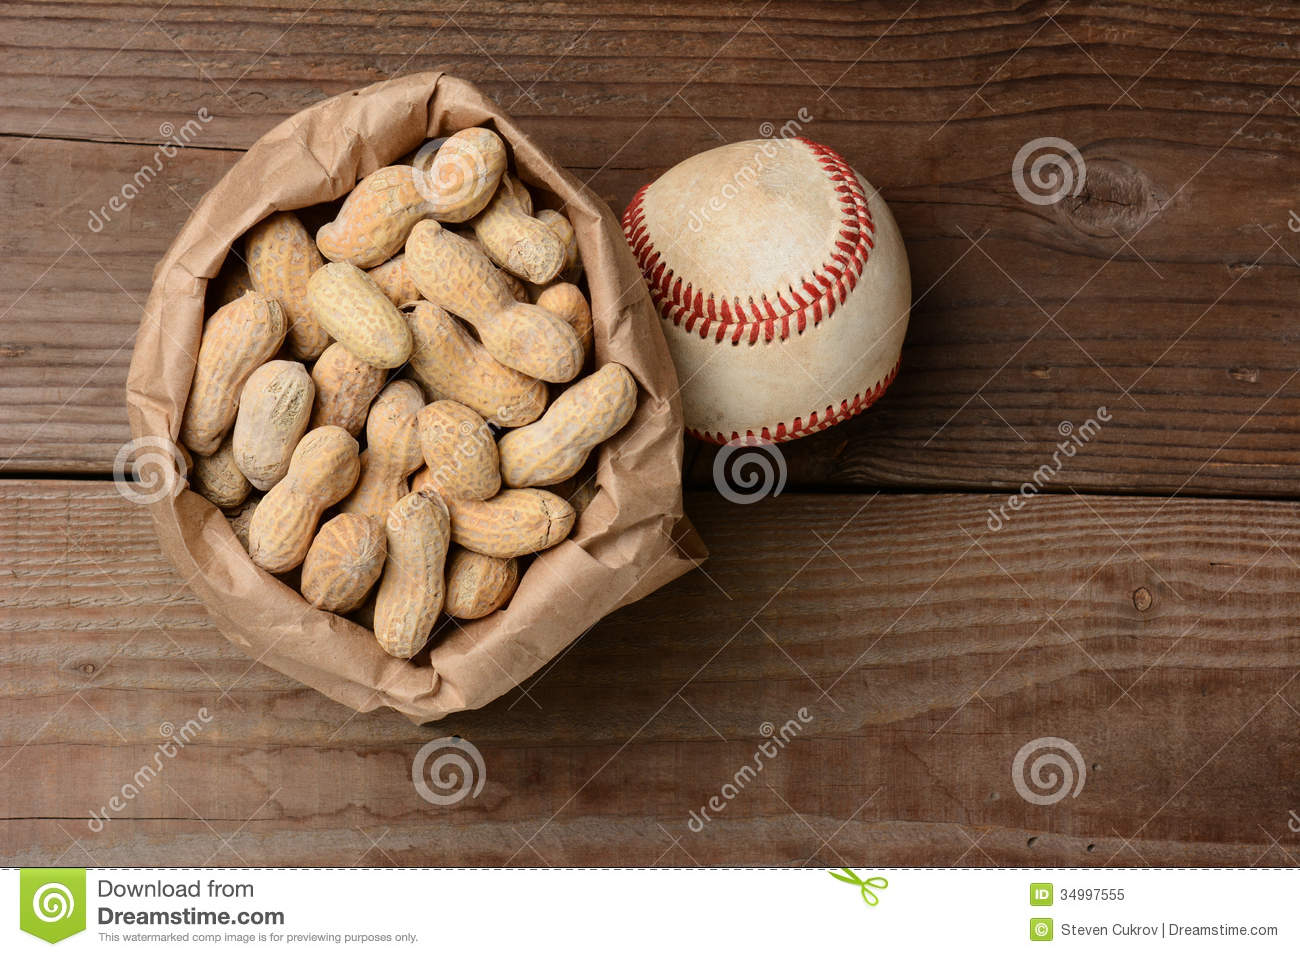 Bag Of Peanuts And A Baseball On An Old Wooden Bench At The Ballpark